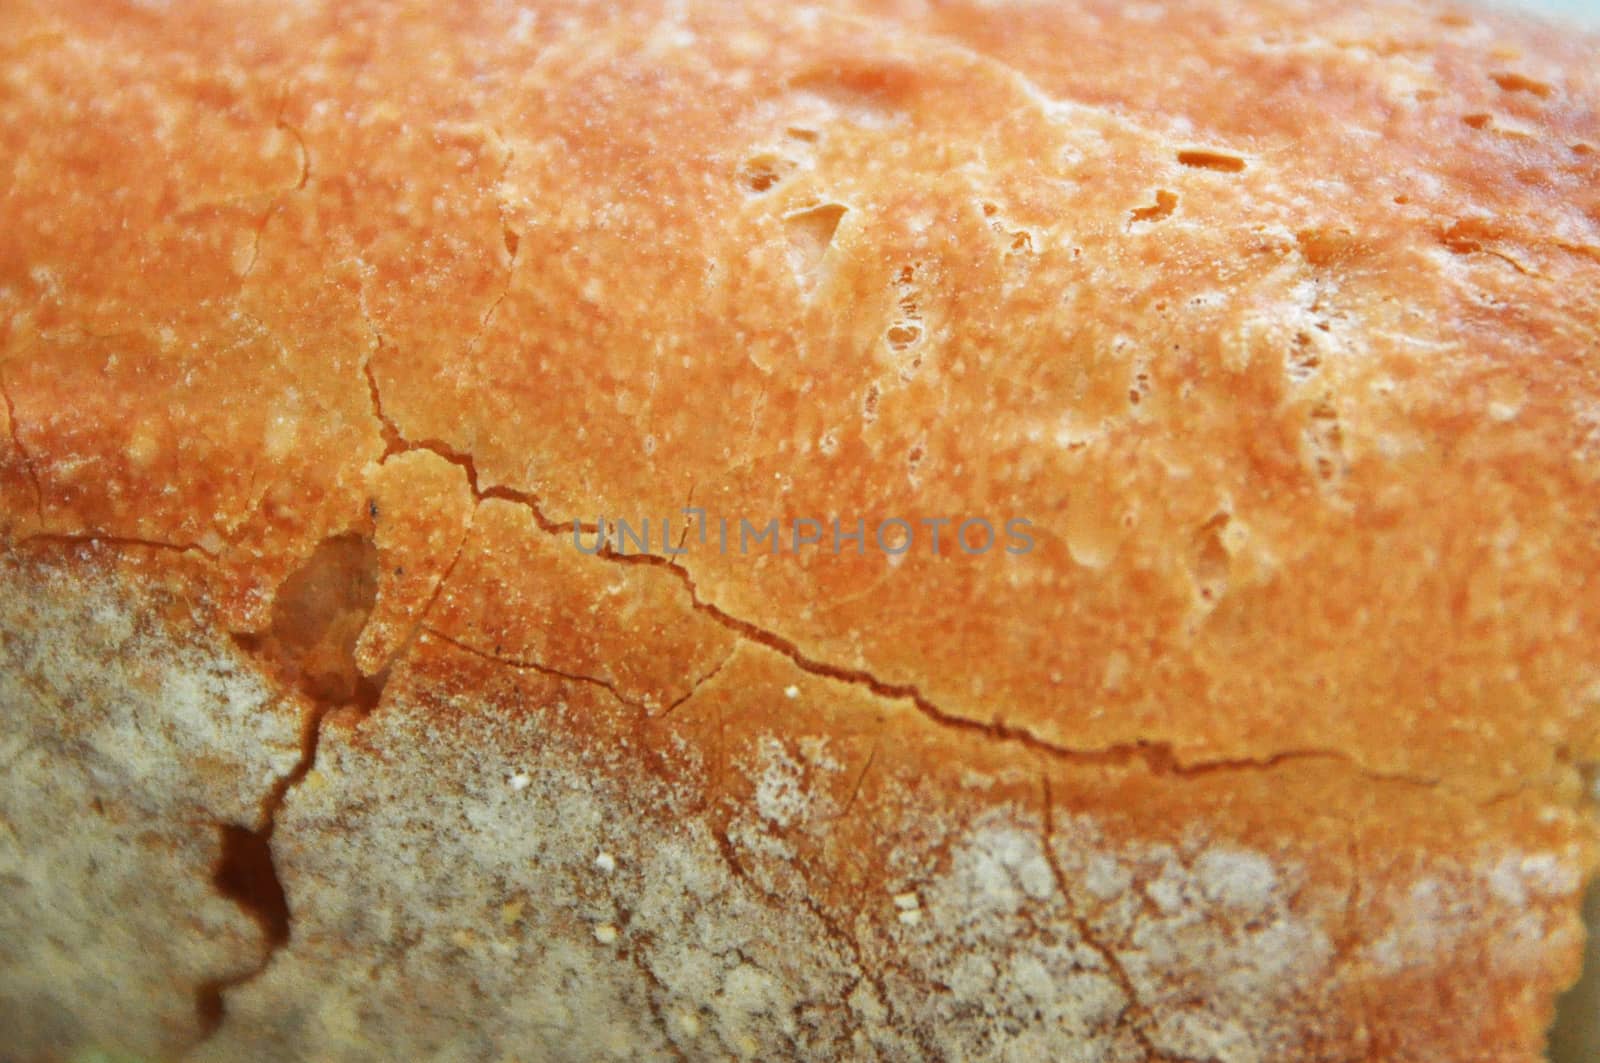 texture of bread crust by AlessandraSuppo